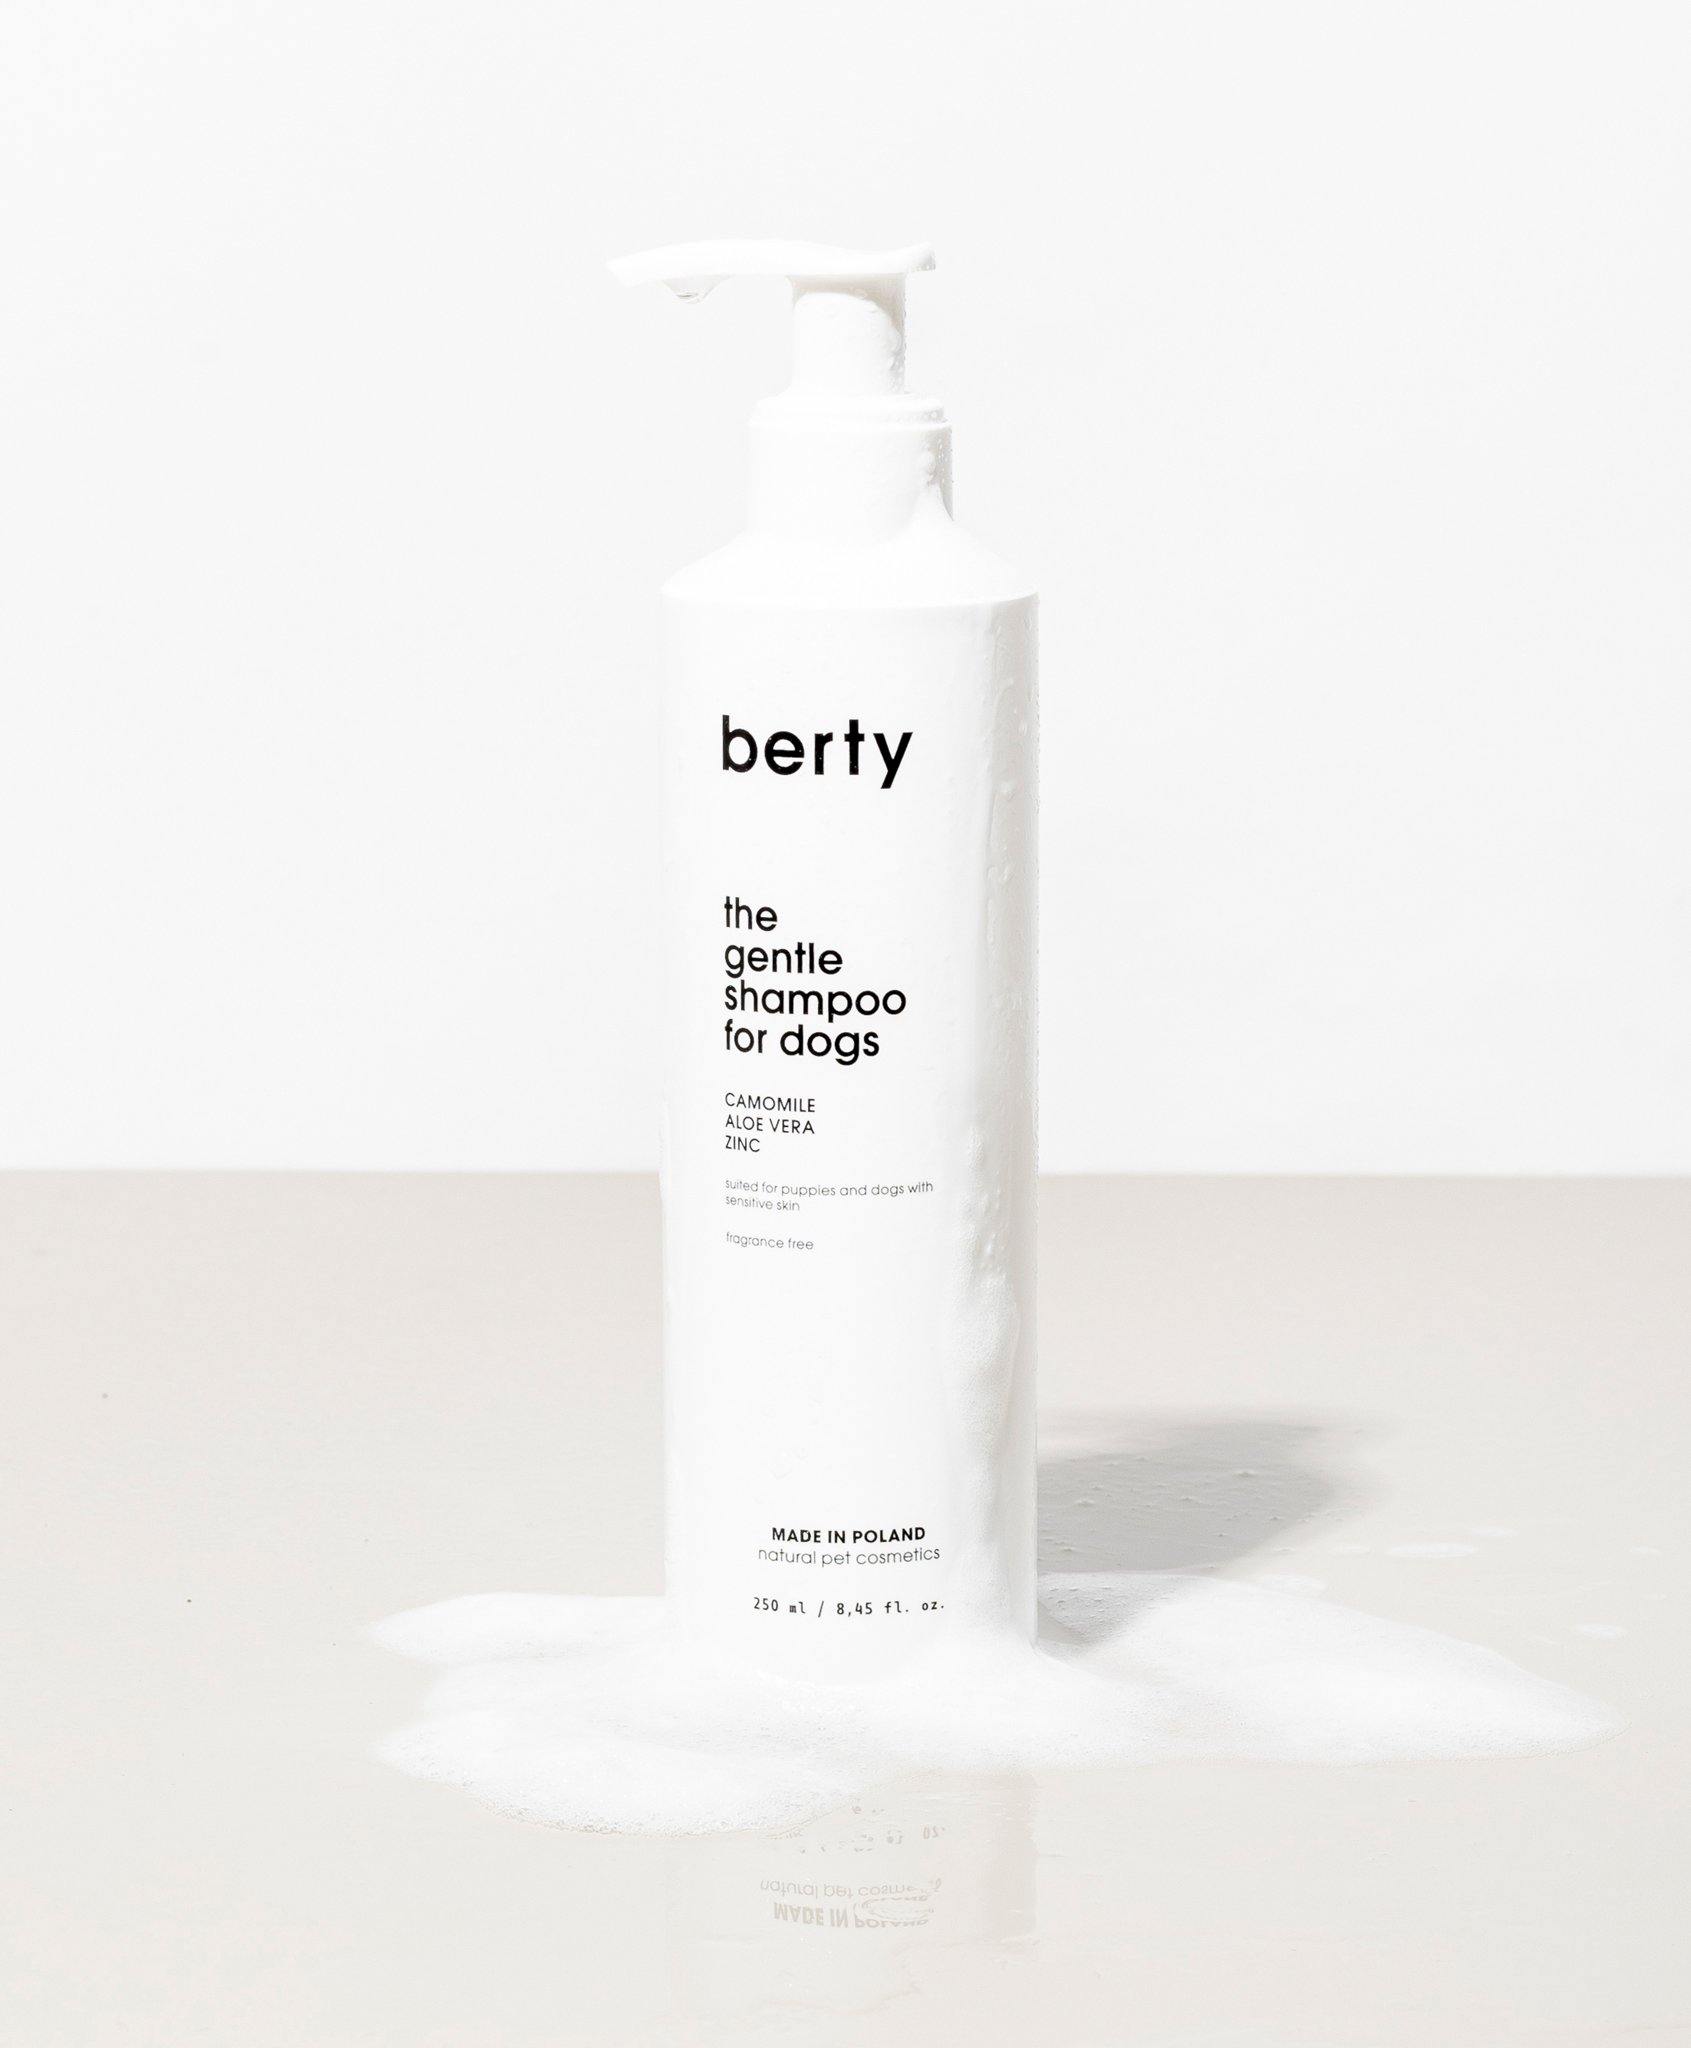 the gentle shampoo for dogs - berty